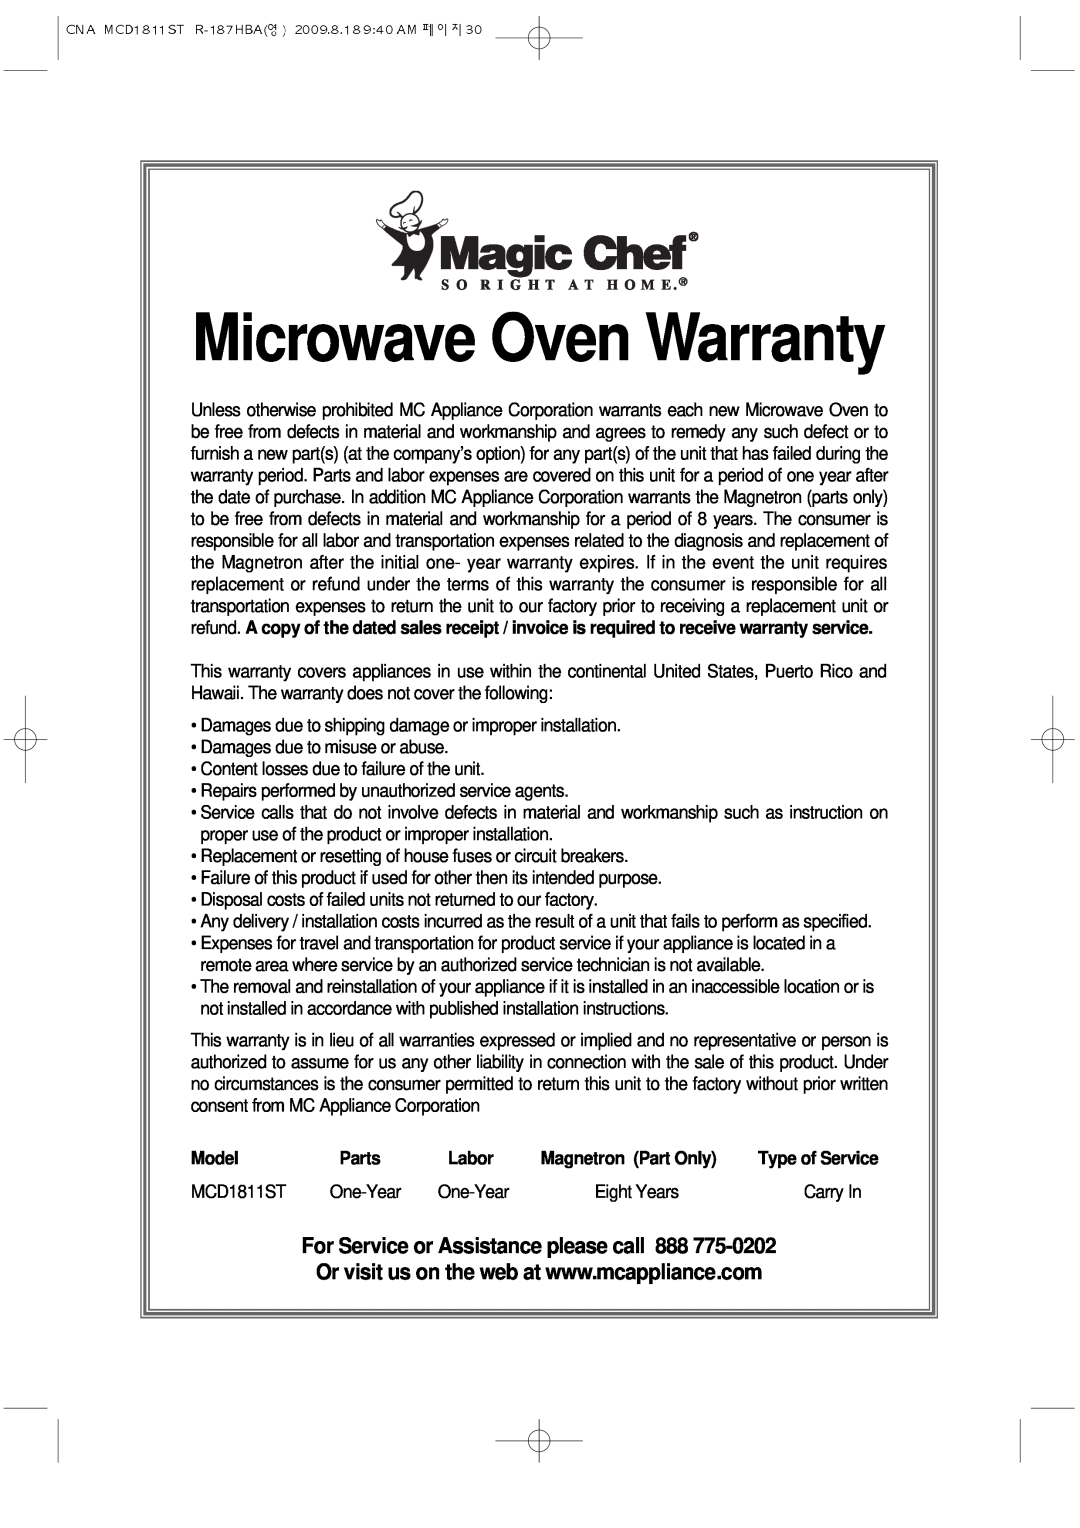 Magic Chef MCD1811ST instruction manual Microwave Oven Warranty, Model, Parts, Labor, Magnetron Part Only 